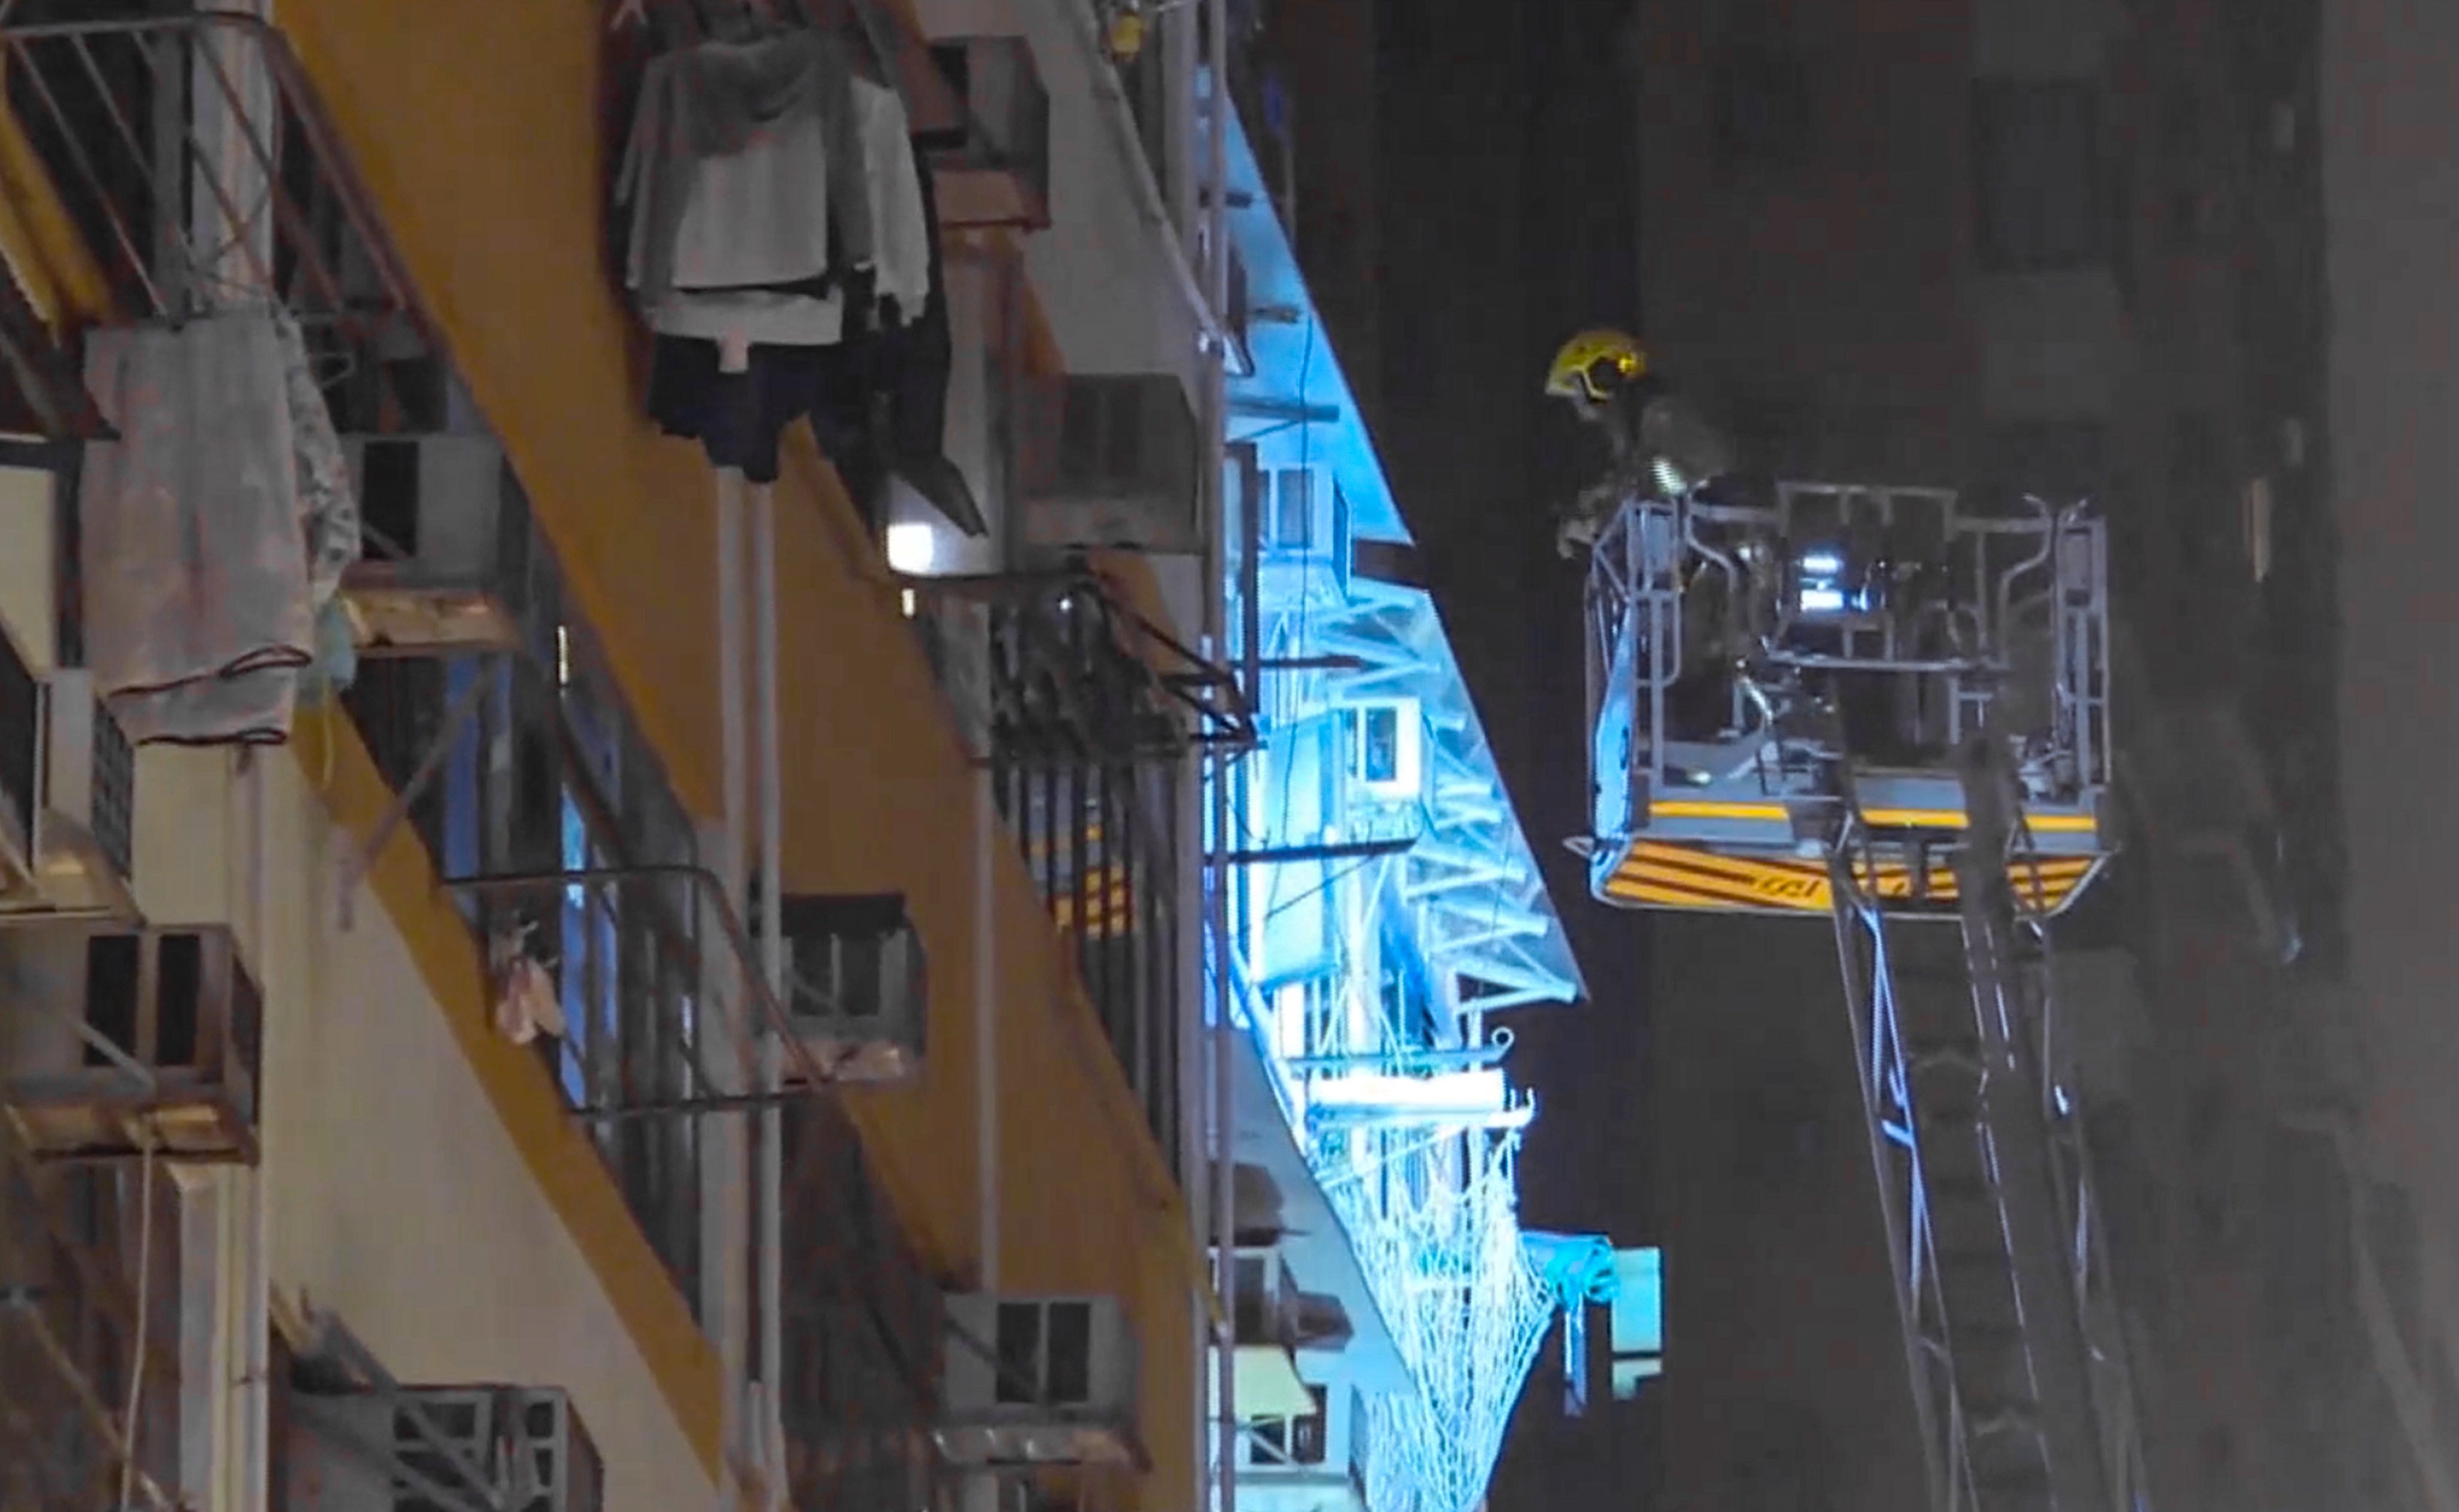 A screengrab of footage showing firefighters at the scene of the blaze in Tsuen Wan district. Photo: Cable TV News